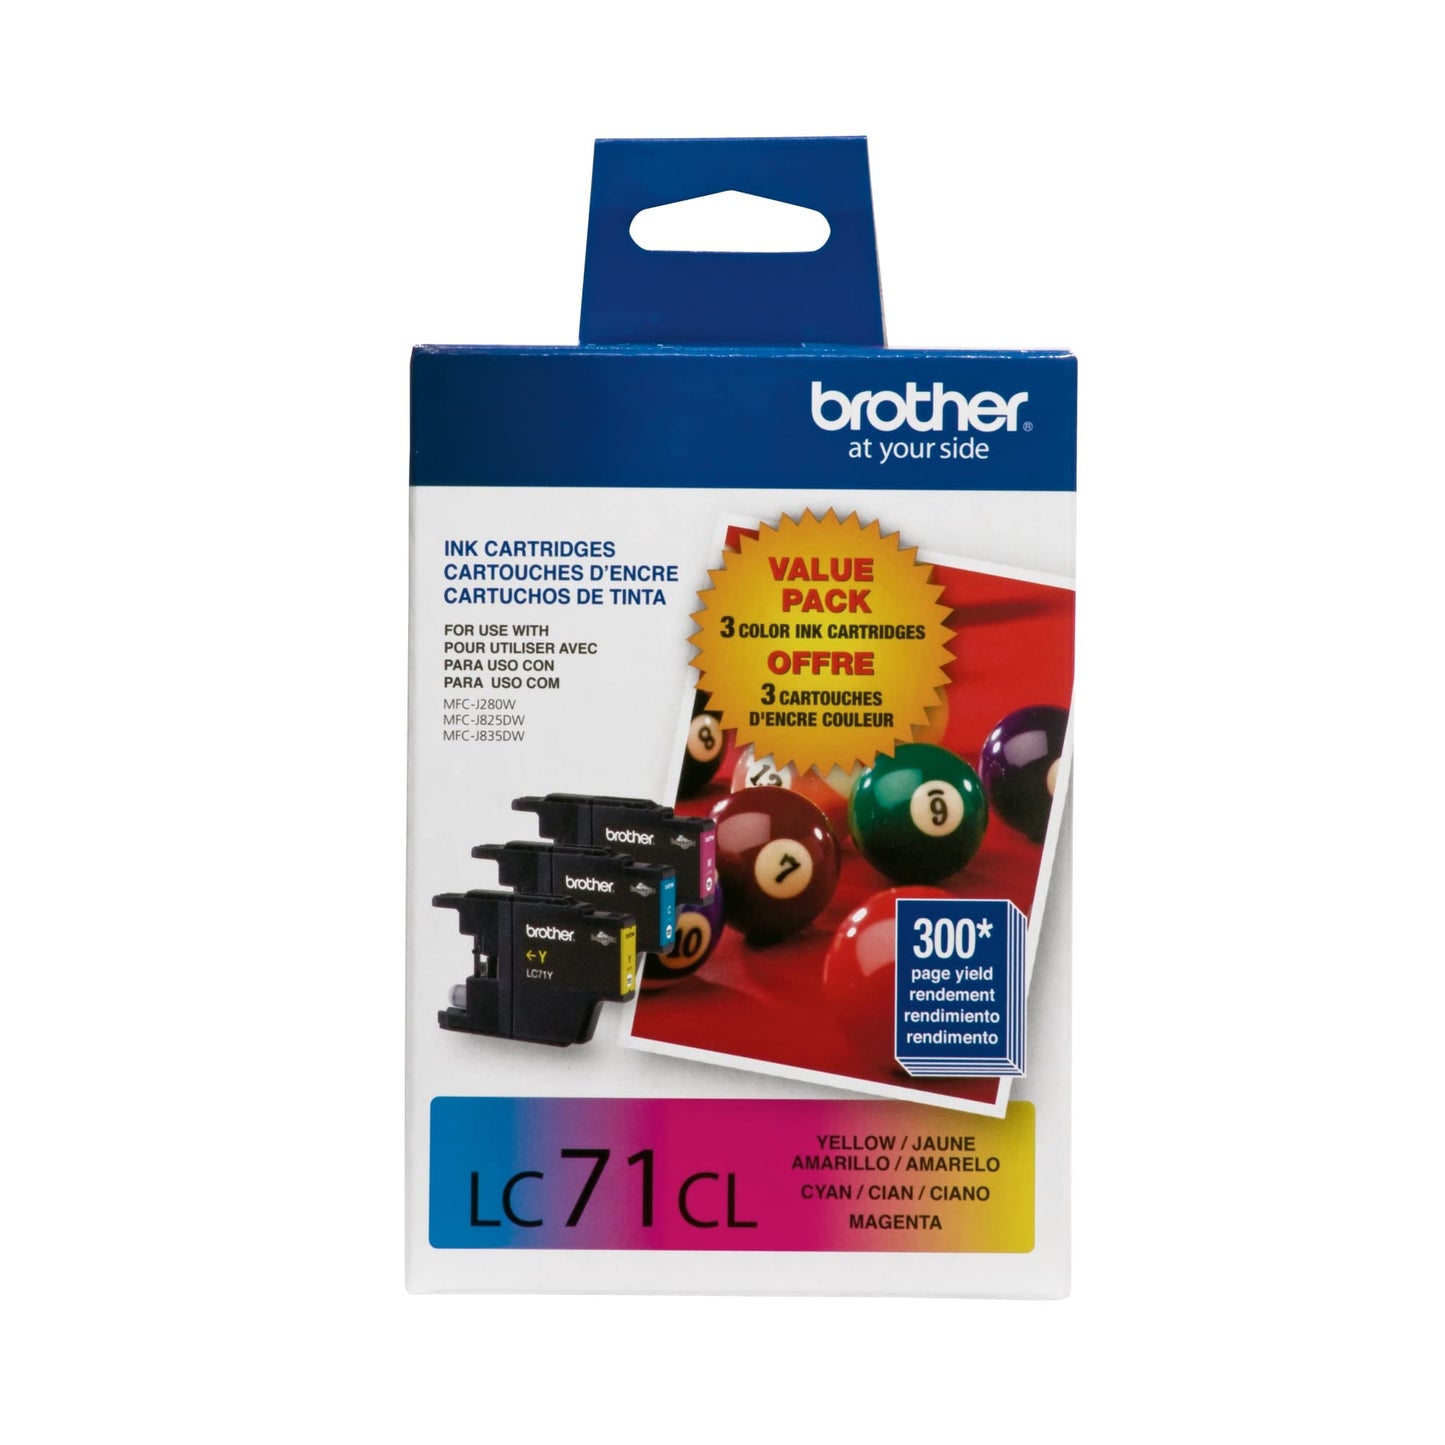 Brother LC713PKS 3-Pack of Innobella Color Ink Cartridges (1 each of Cyan, Magenta, Yellow), Standard Yield